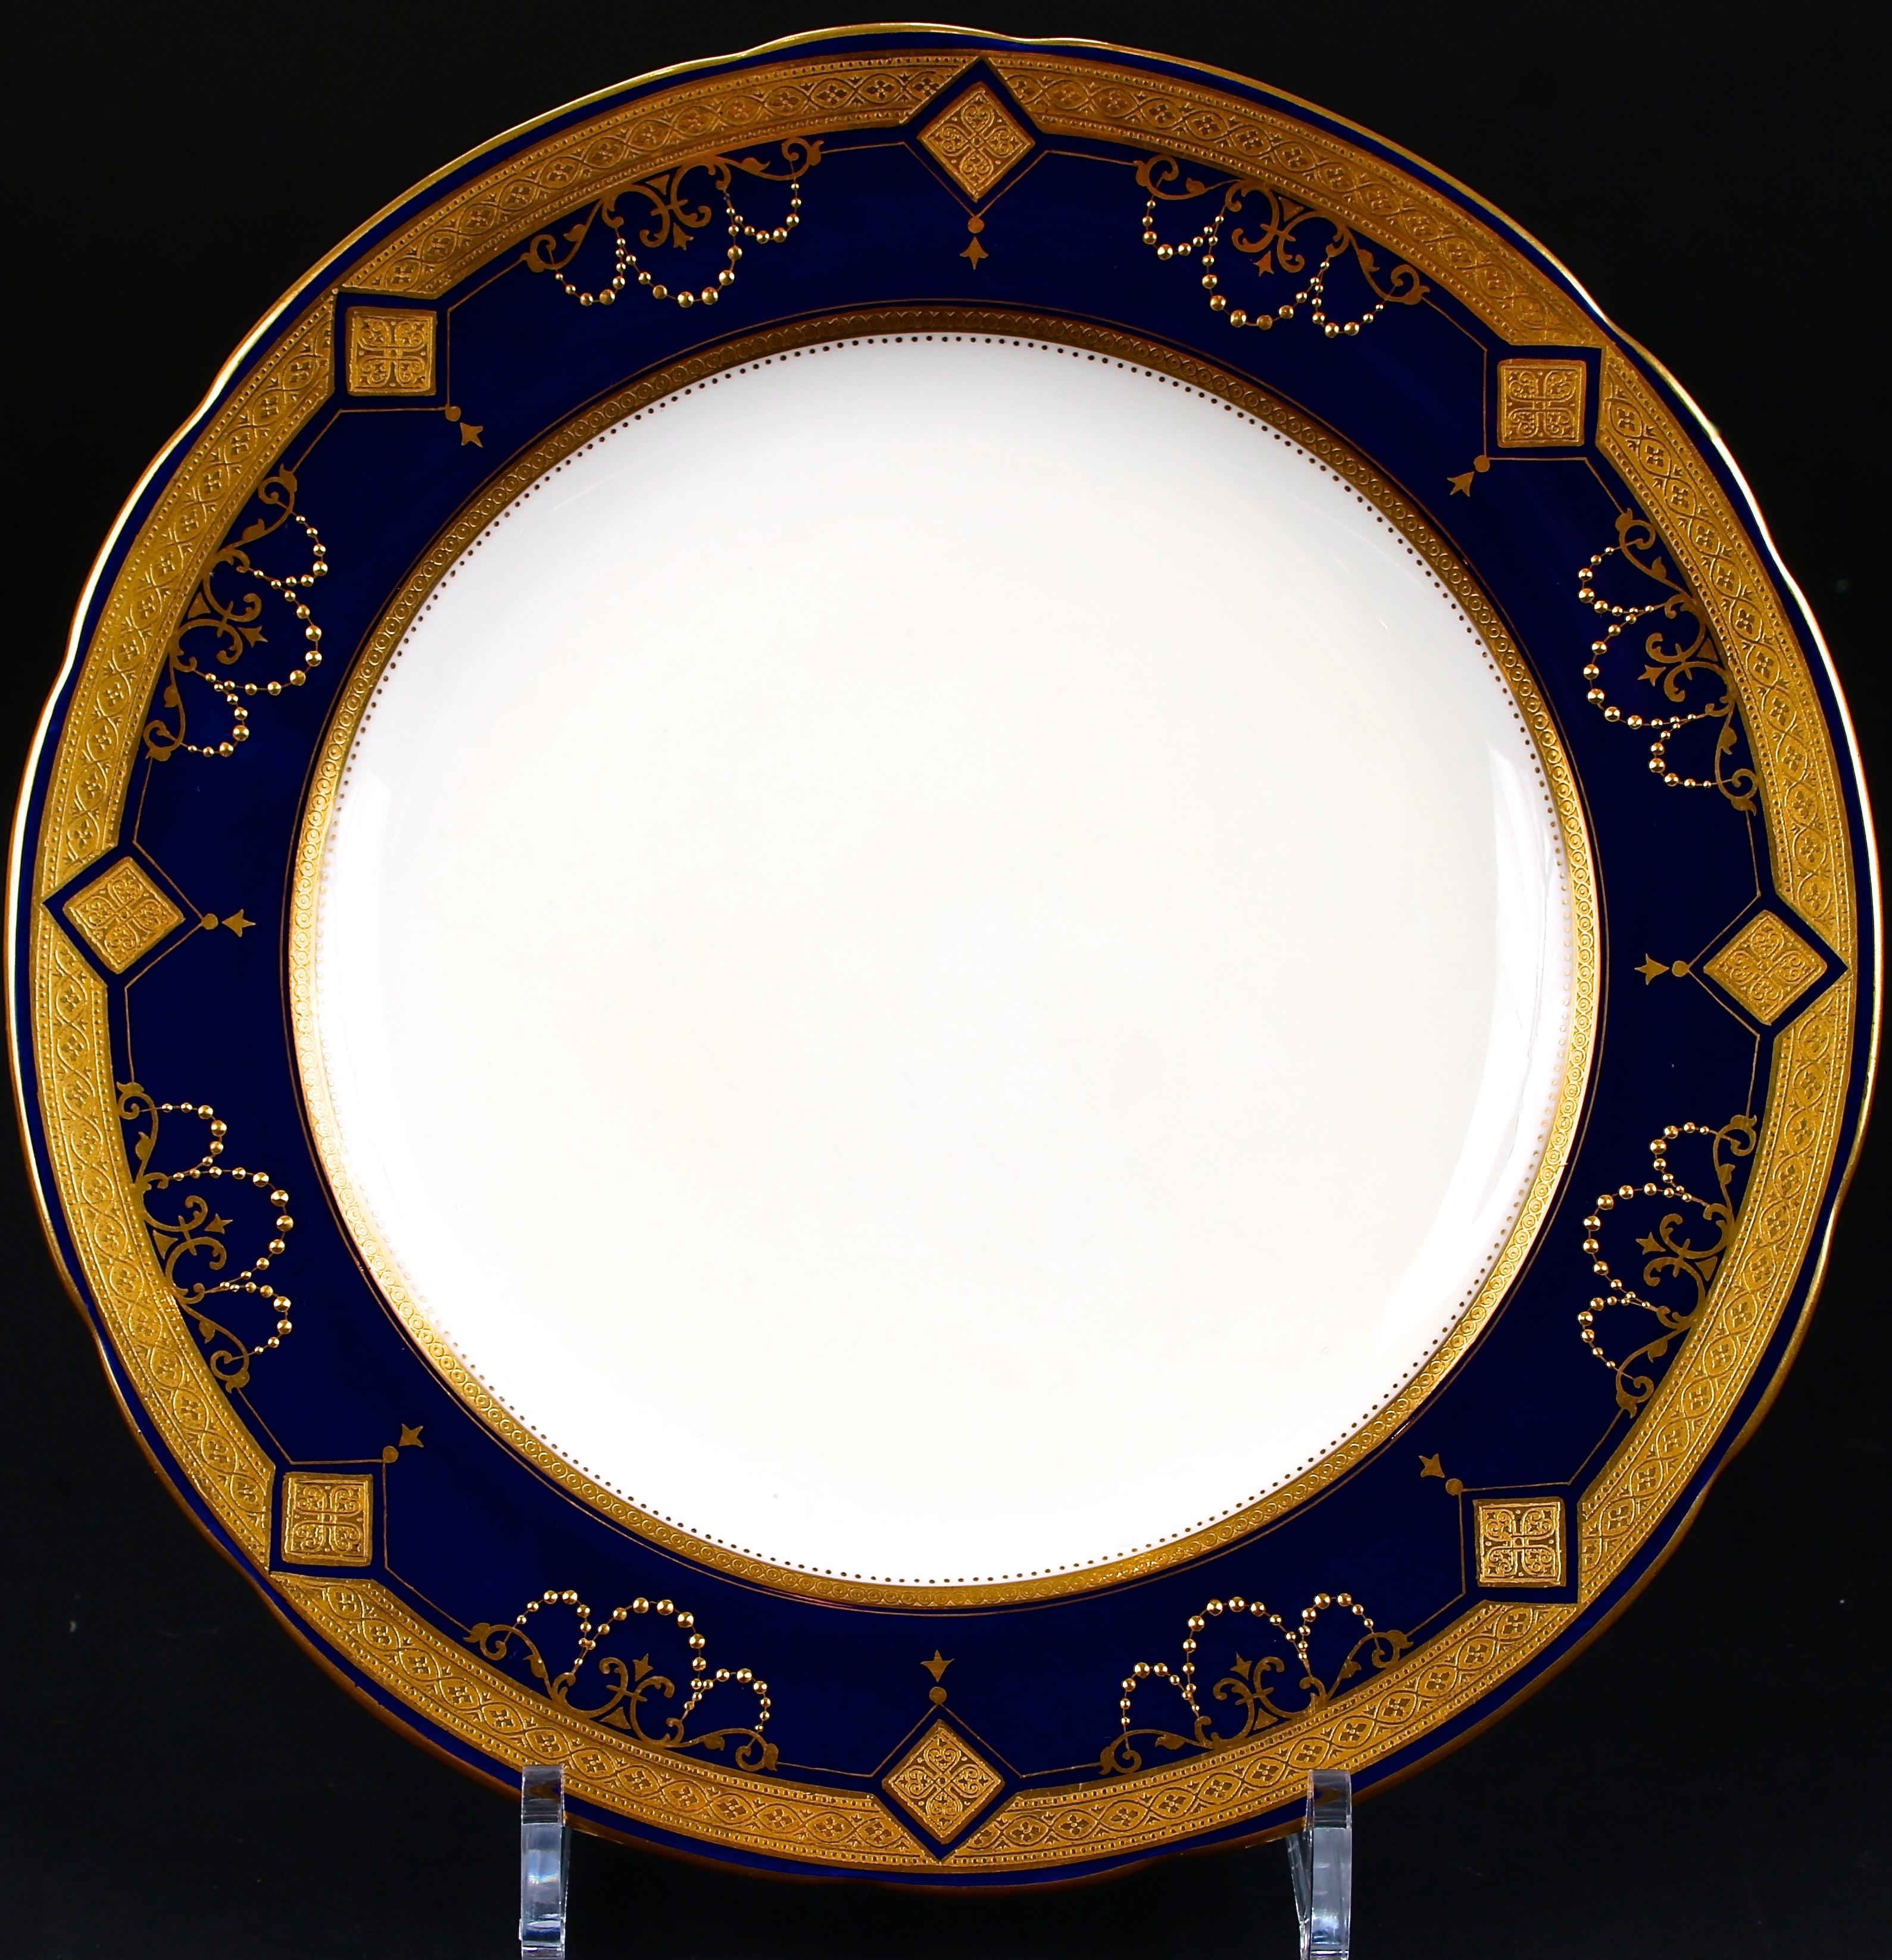 These 19th century Minton, Stoke-on-Trent, England, cobalt medallion plates feature 22-karat gold acid-etched in the inner and outer border with gold encrusted medallions interspersed between swags and gold beading. The edge design is 